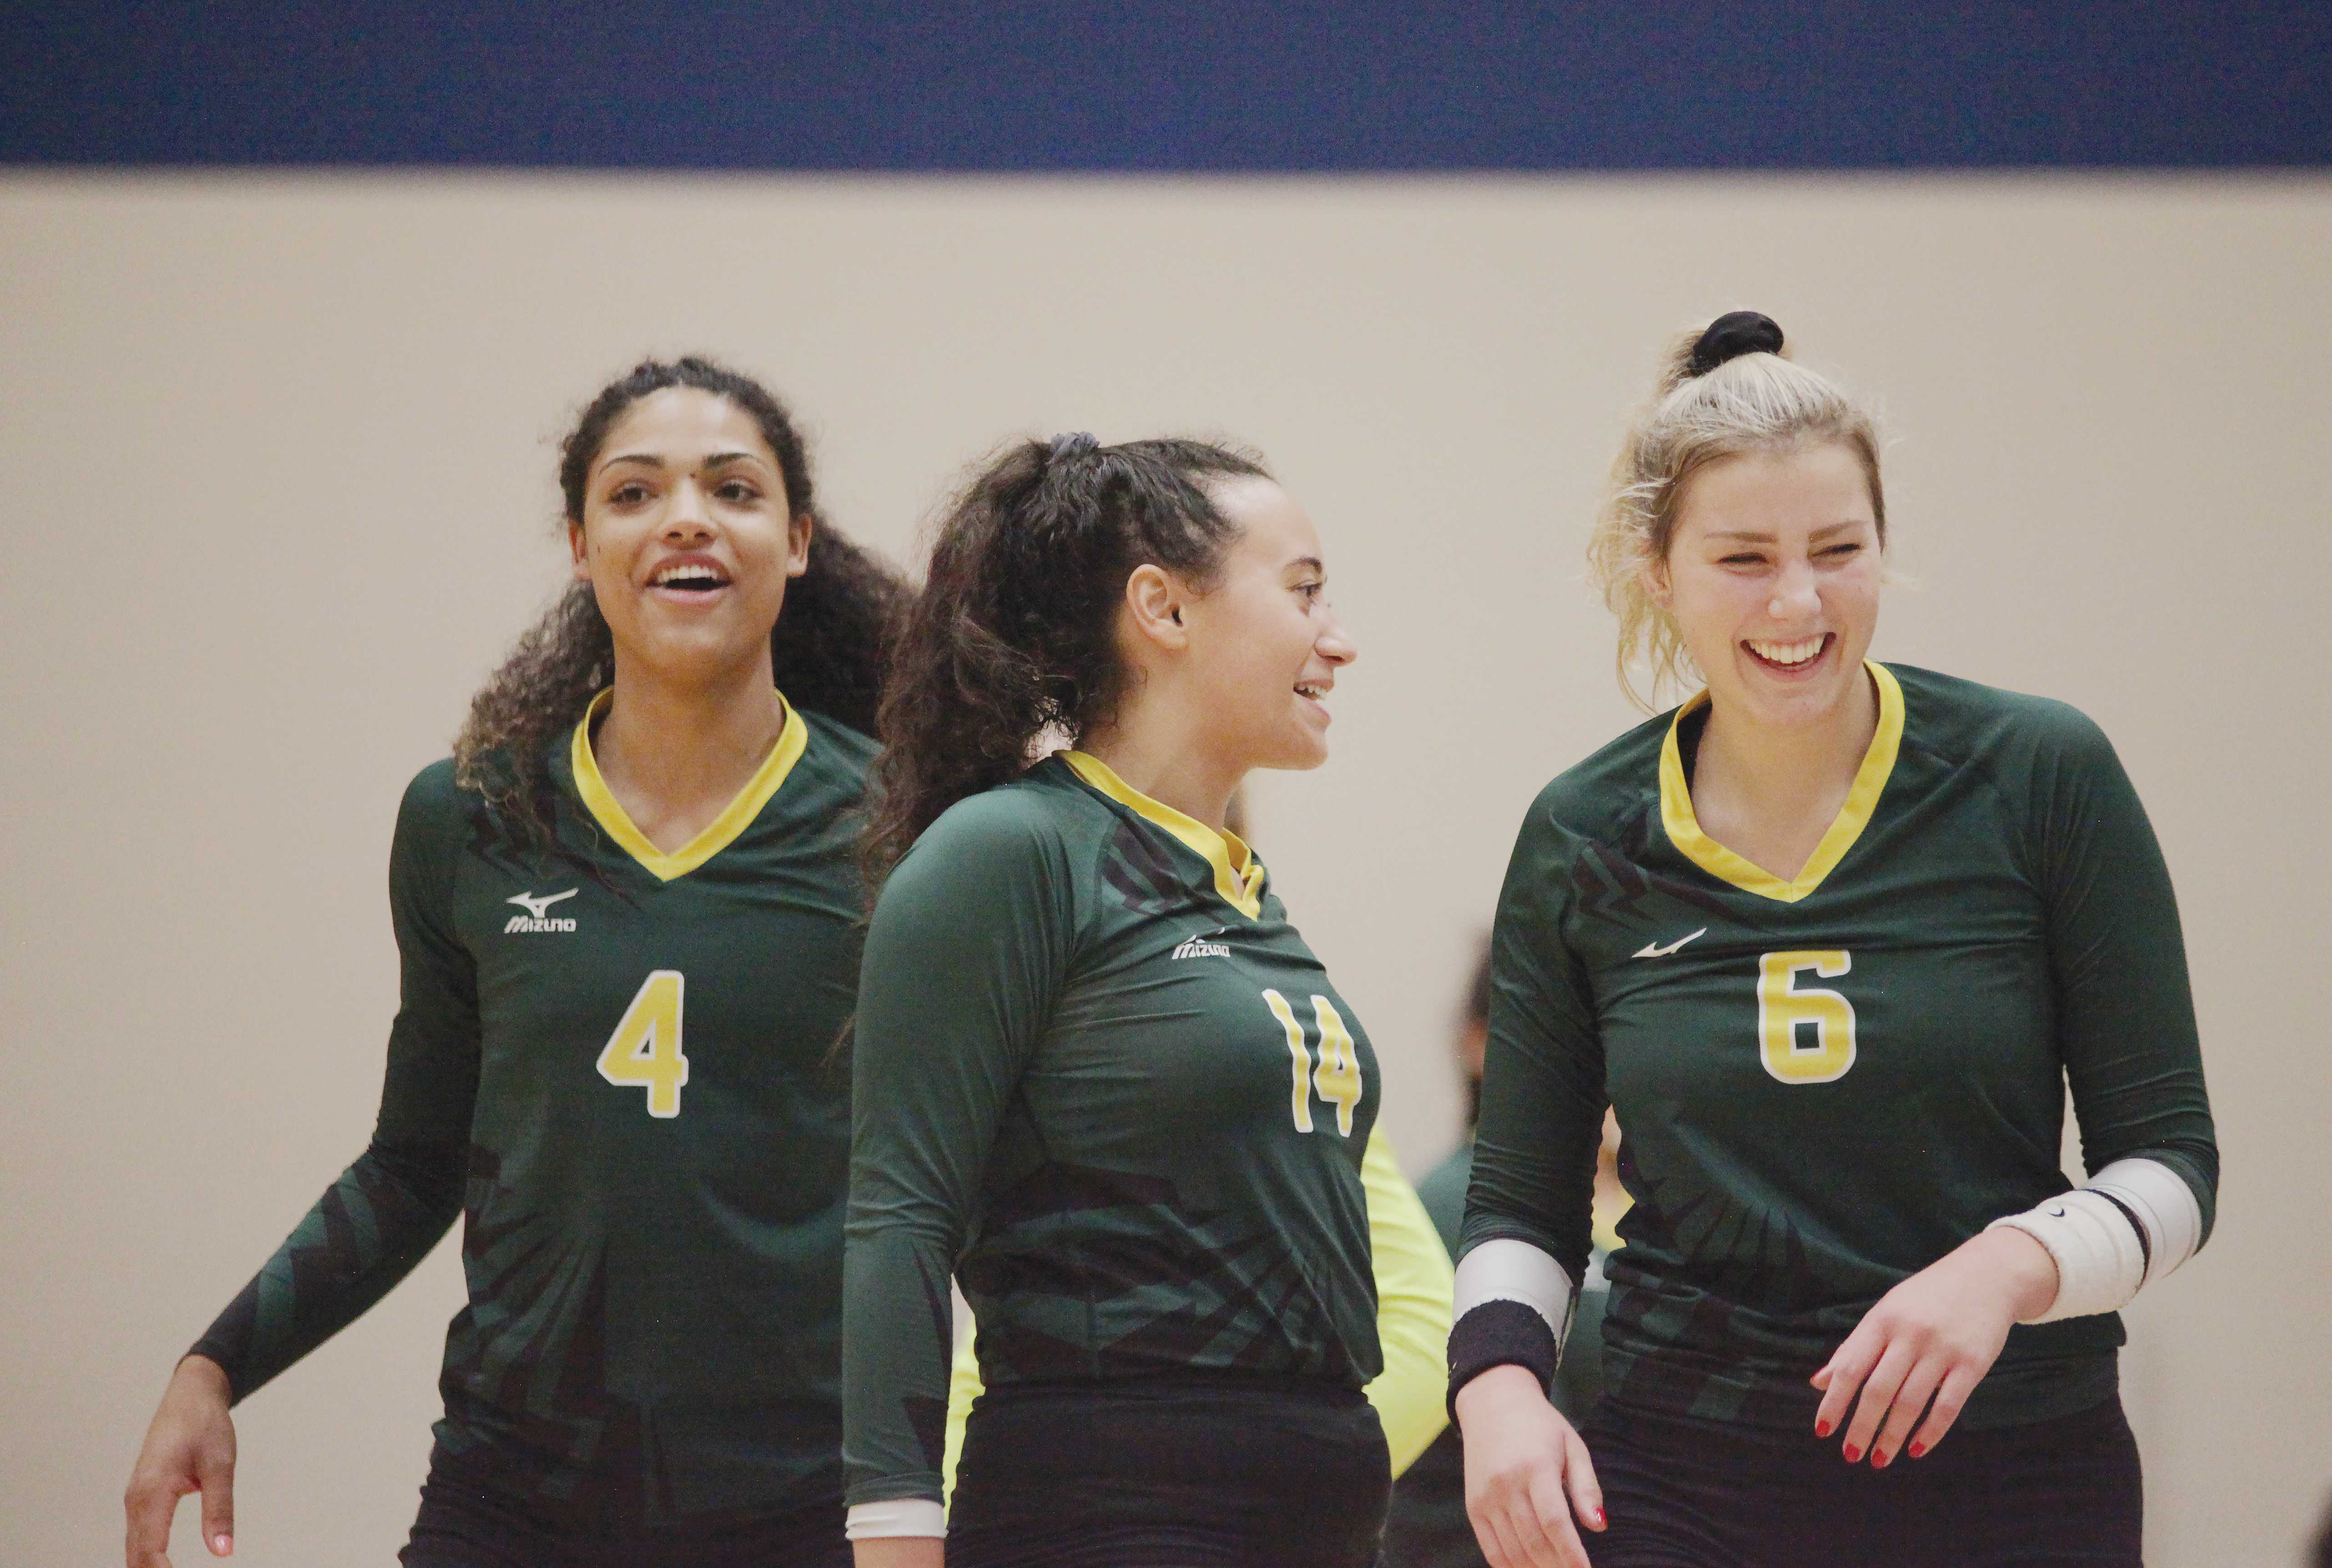 Photo by Malen Blackmon | From left: Lady Bears outside hitter Yasmin Miller (#4), setter Morgan Frisby (#14) and outside hitter Faith Fetzer (#6) celebrate after a point earlier this season against North Lake College.